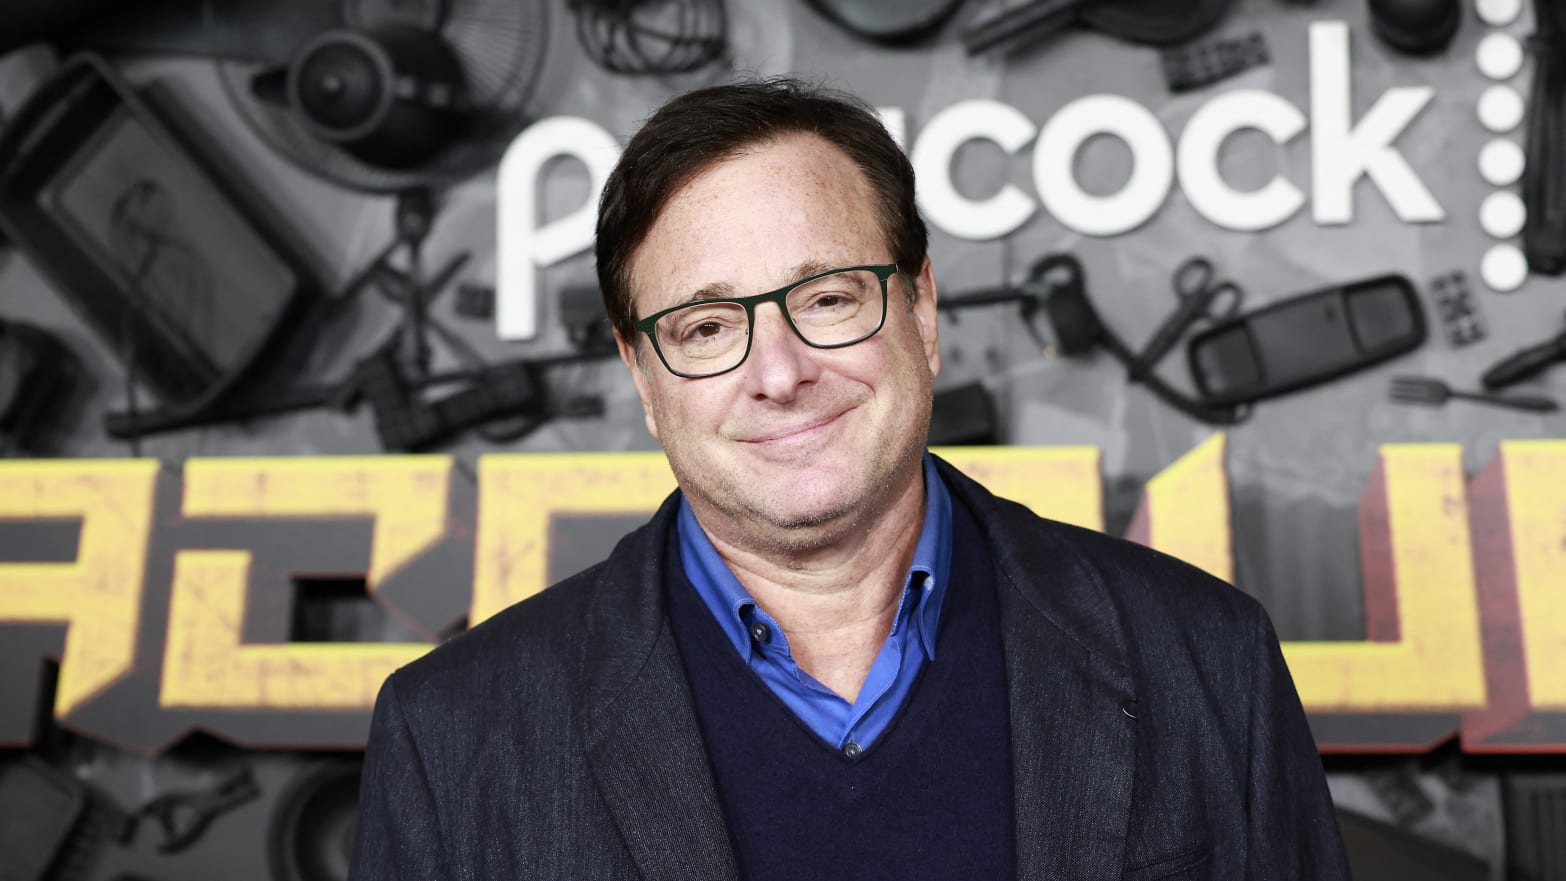 Bob Saget, Comedian and Star of TV’s ‘Full House,’ Dies at 65. Is it due to the….COVID VACCINE???